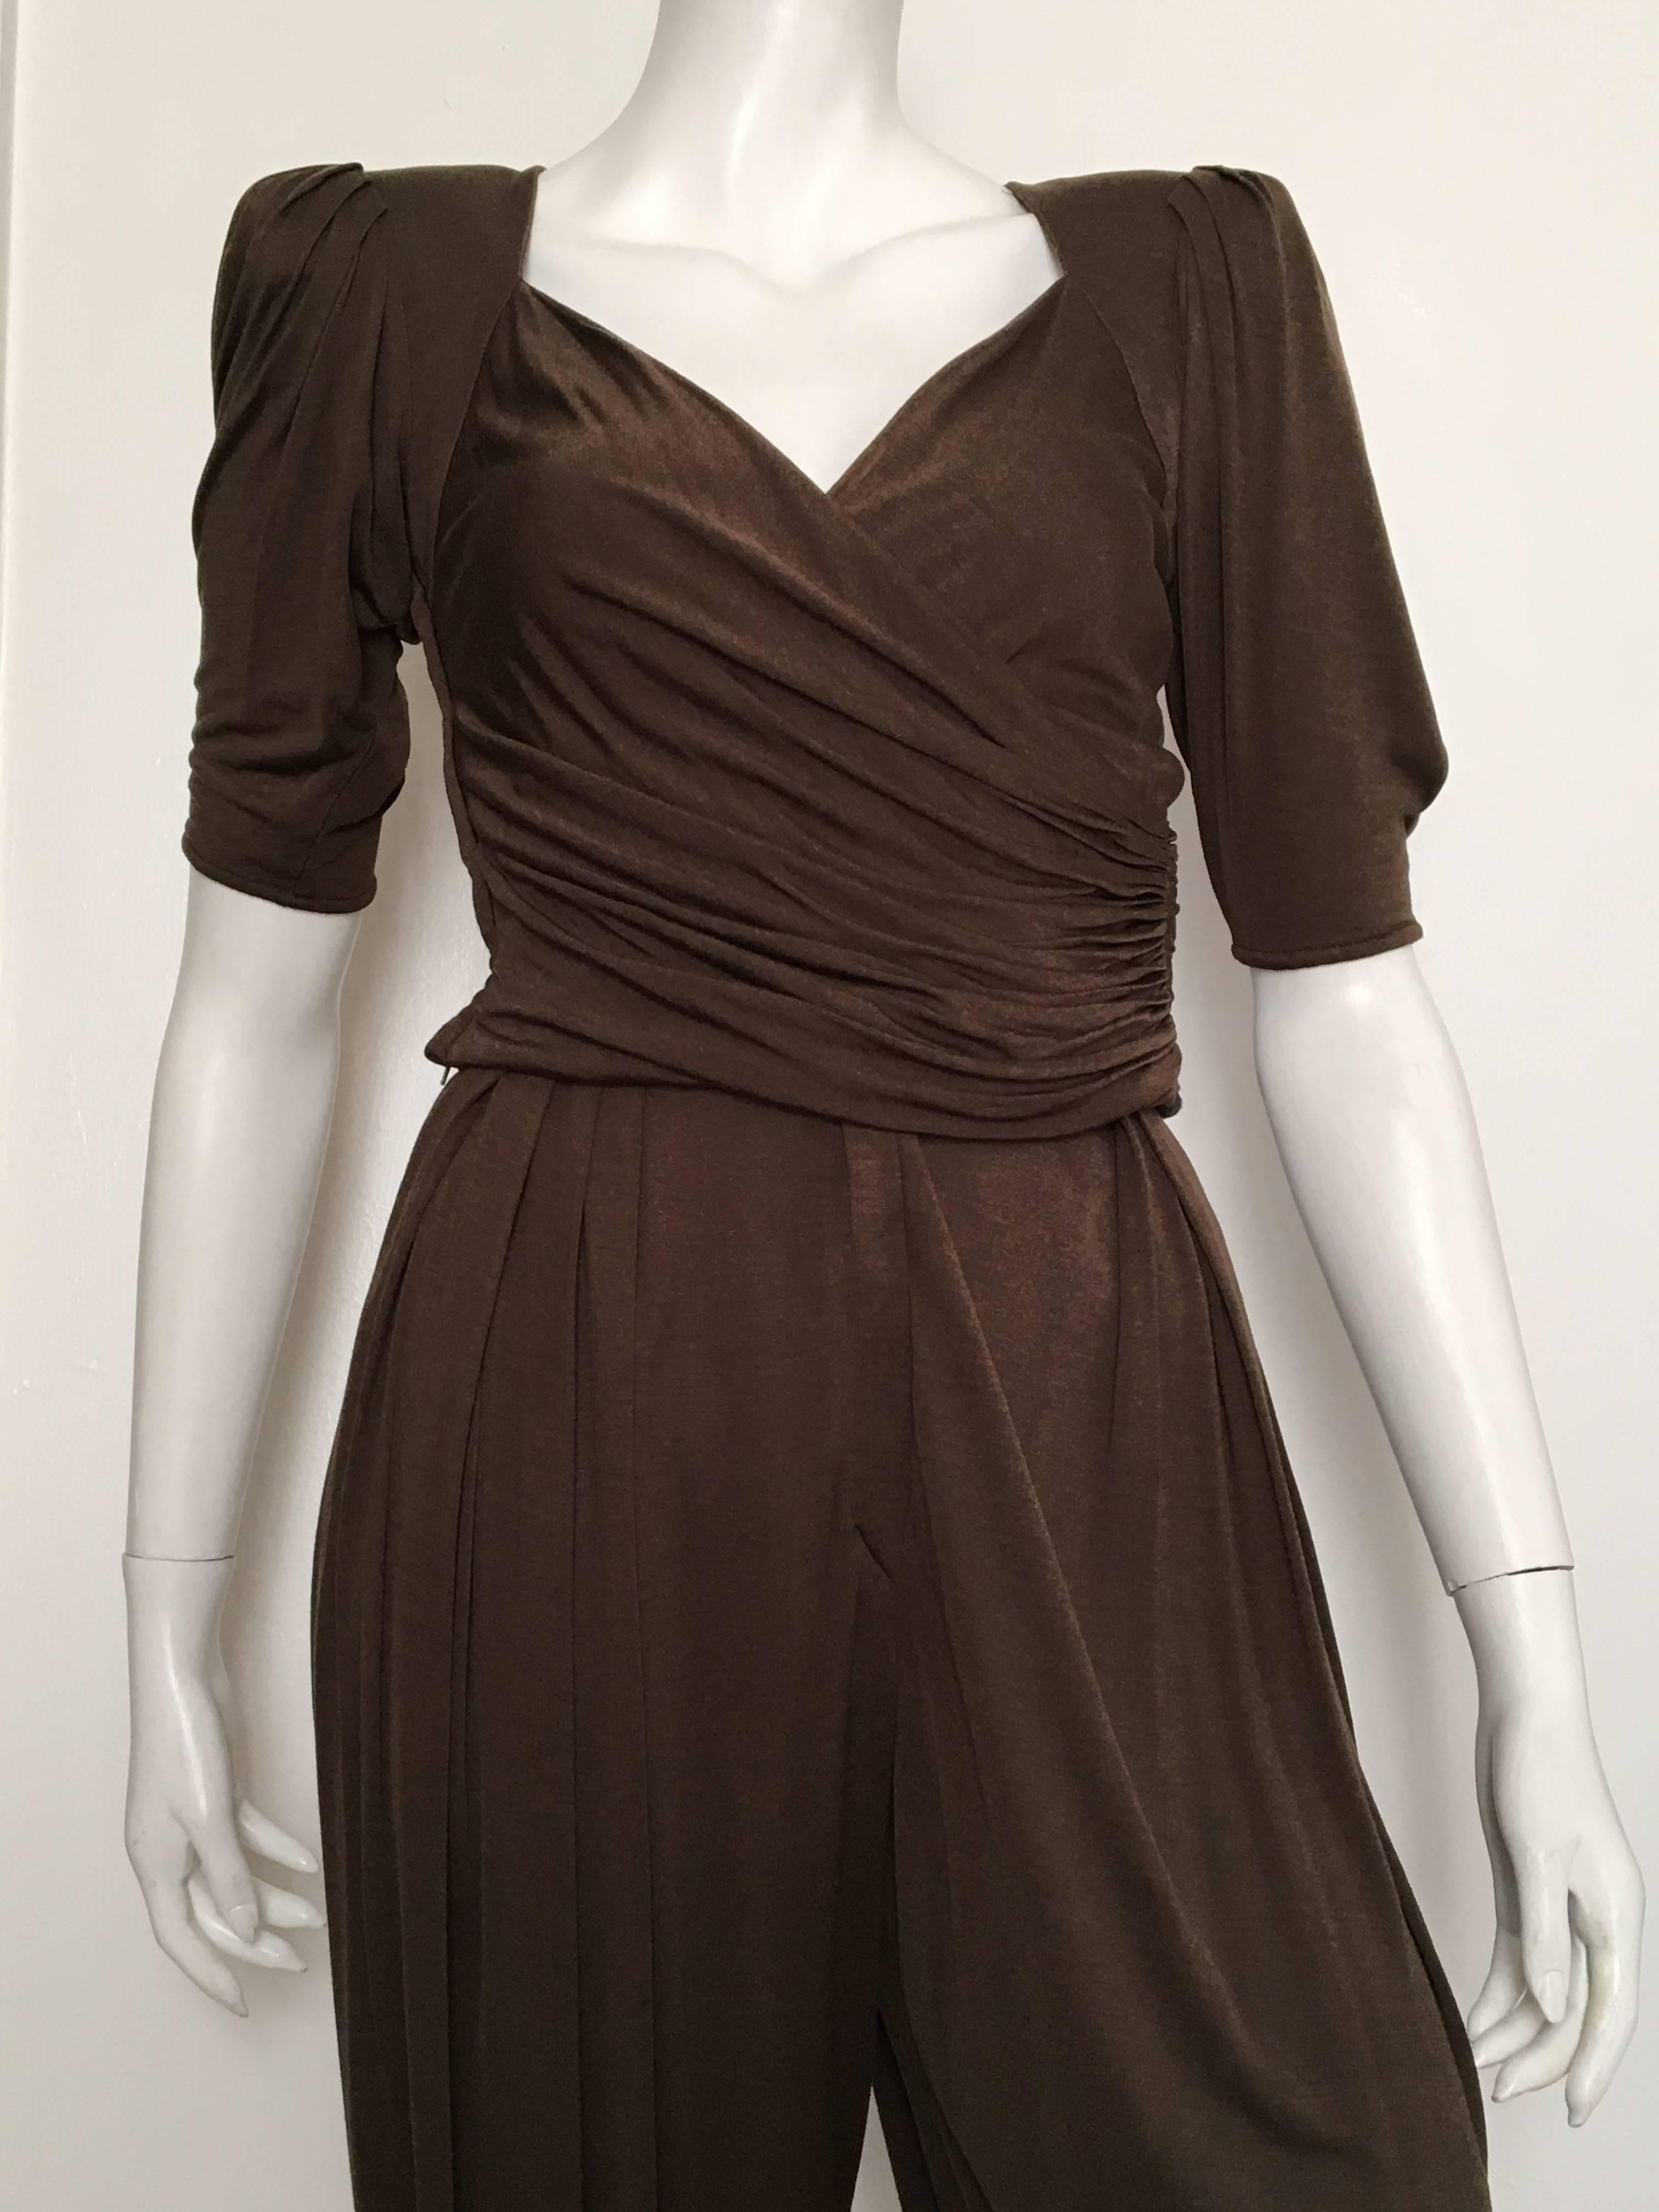 Emanuel Ungaro Parallele Paris 1980s brown silk jersey criss cross top & baggy harem pants size 4. Top has shoulder pads and a zipper on the side and pleated pants have pockets. Easy & comfortable yet chic & stylish. Ruching on the side gives the